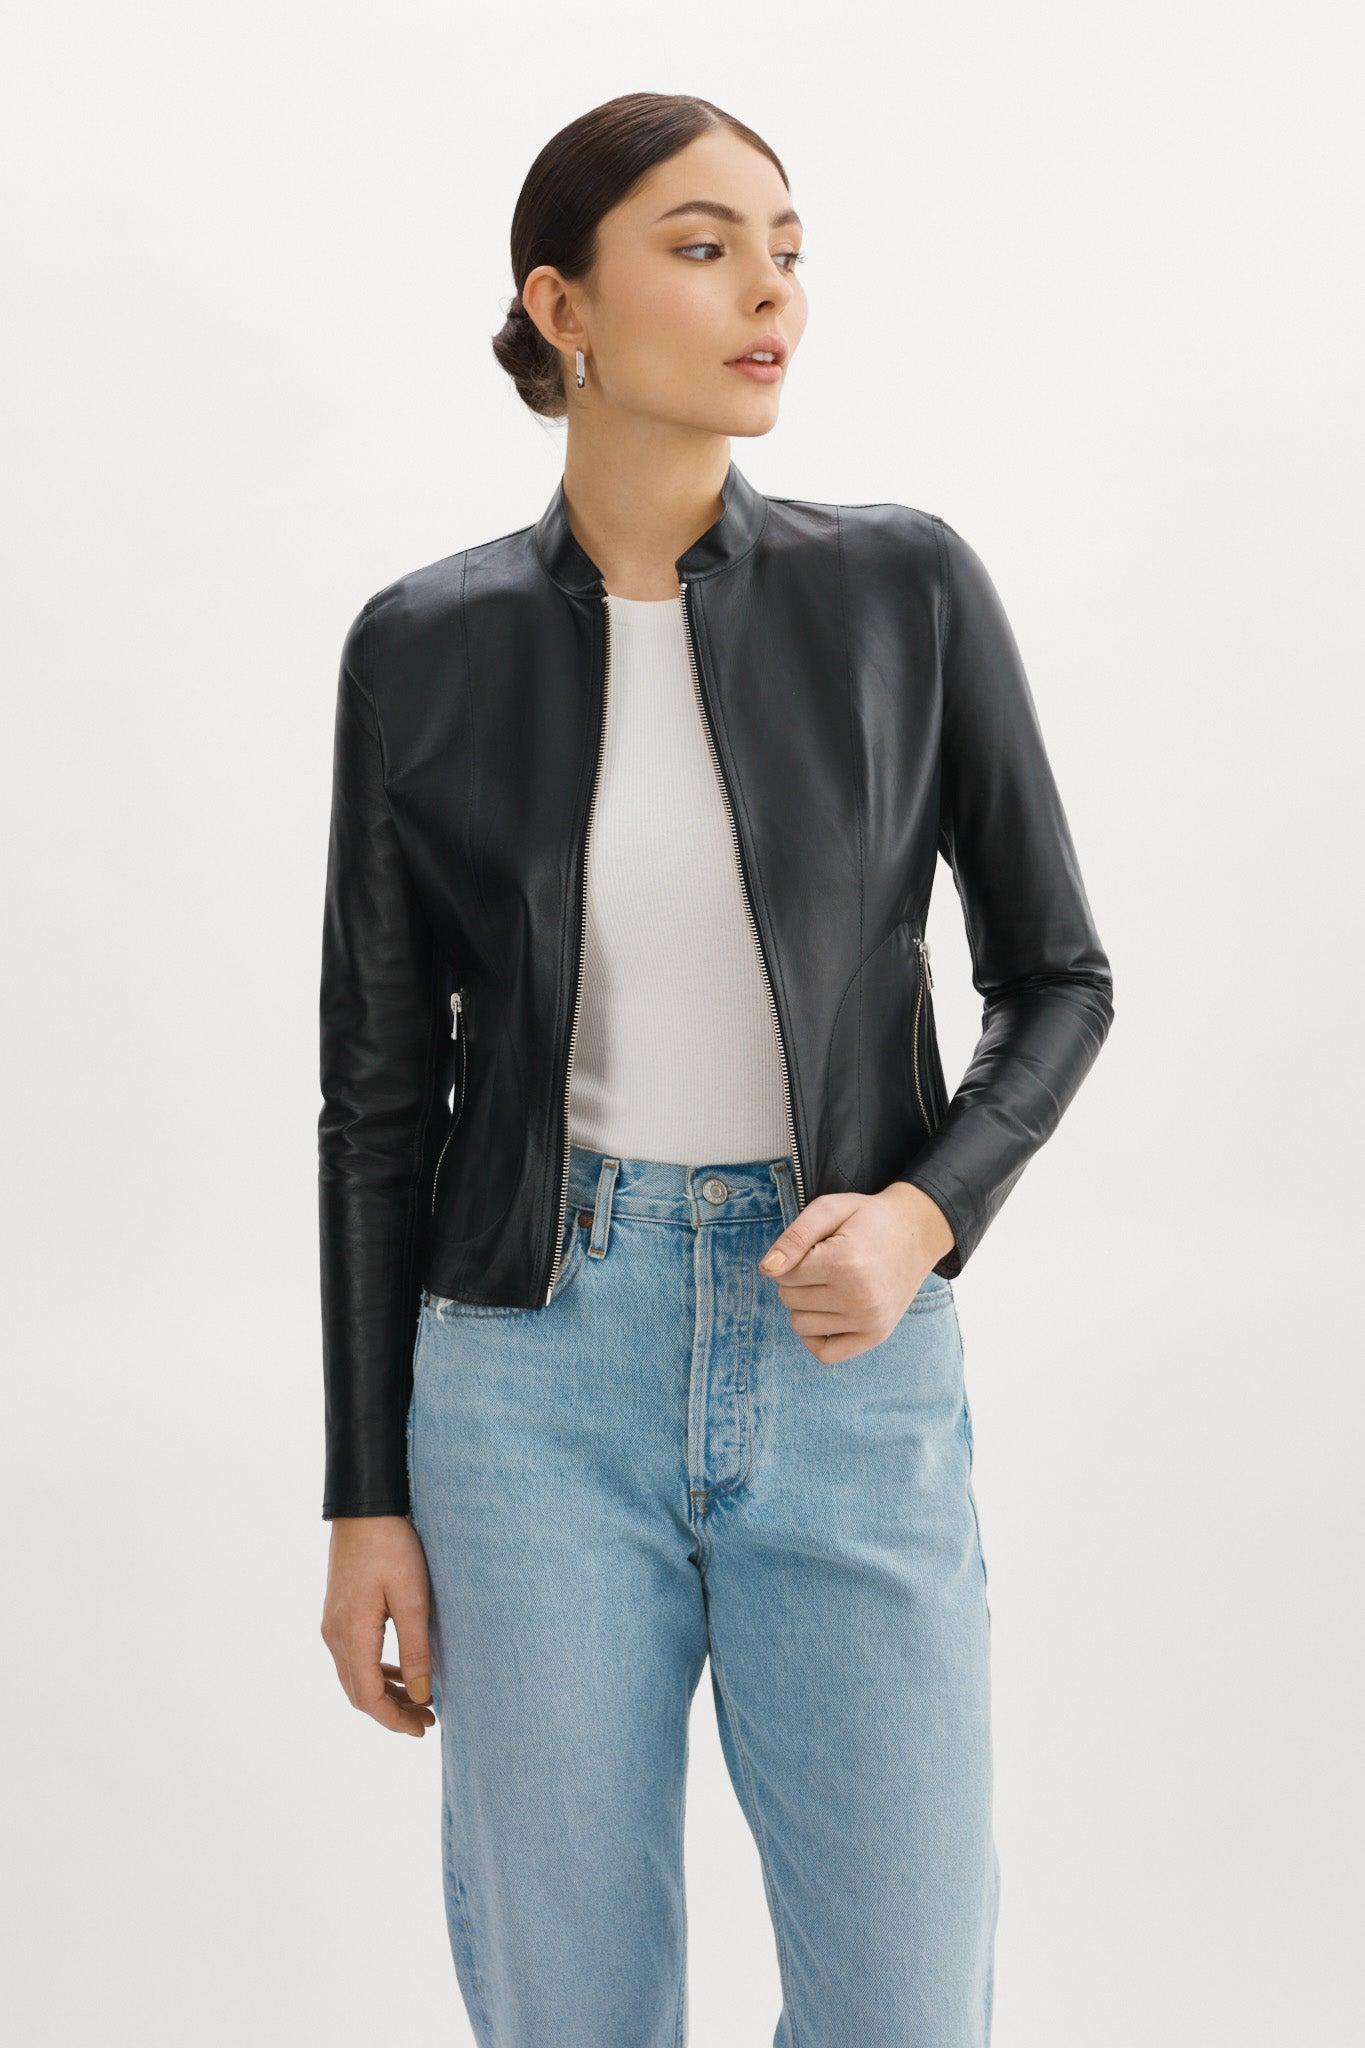 Lamarque Lamarque Chapin Reversible Leather Jacket